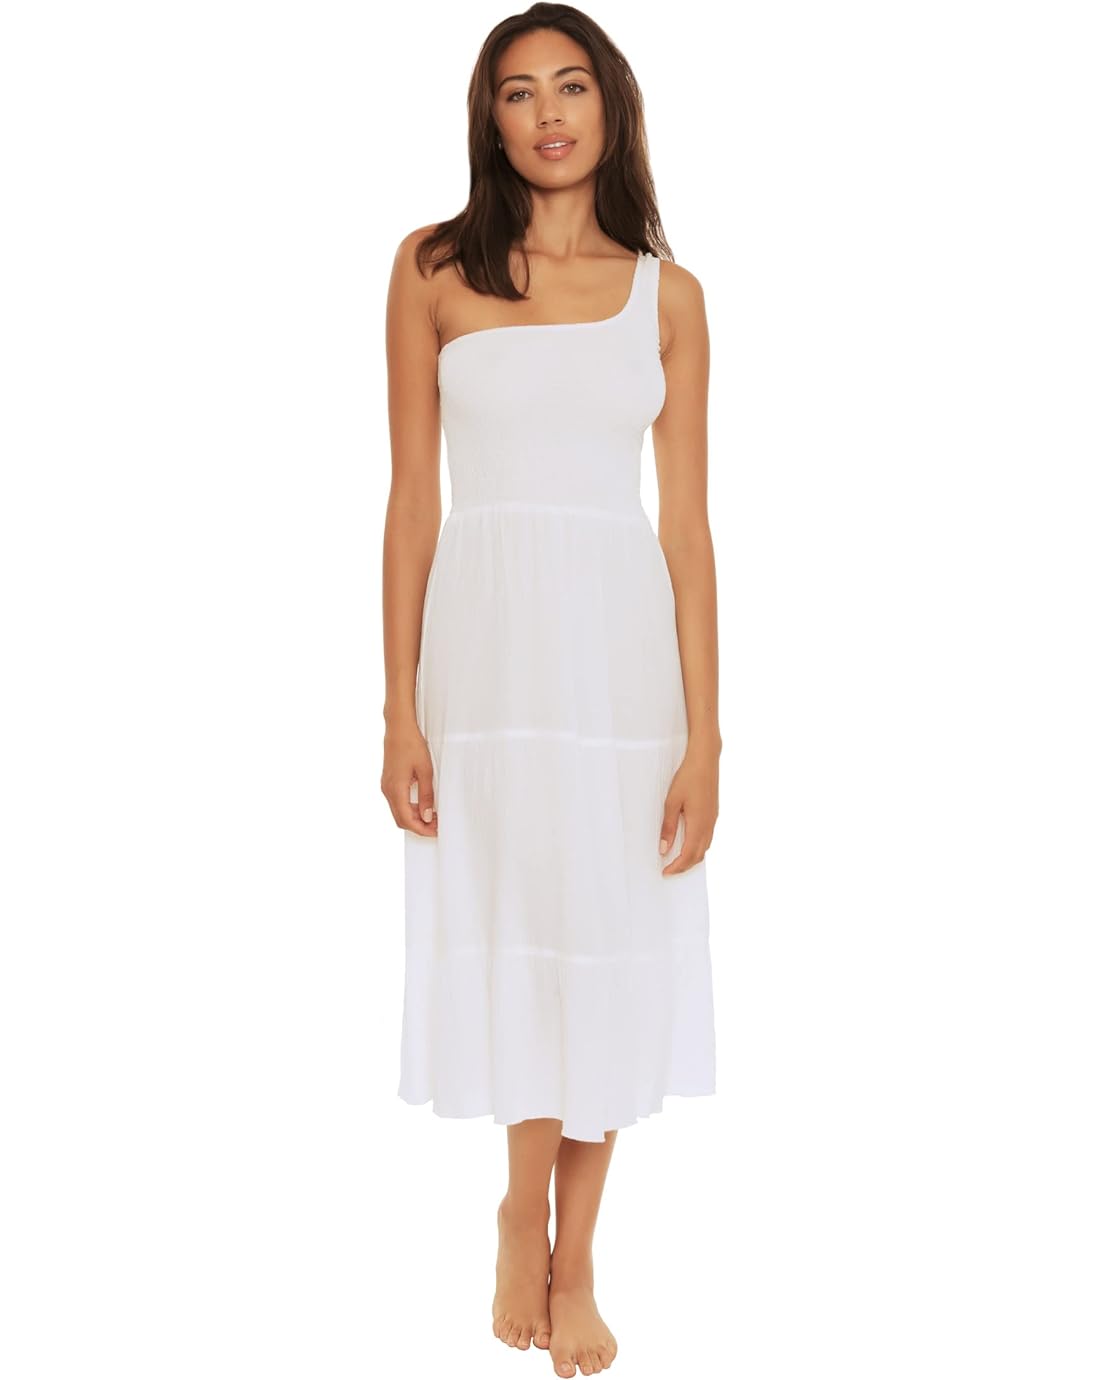 BECCA by Rebecca Virtue Ponza Crinkled Rayon Asymmetrical Dress Cover-Up